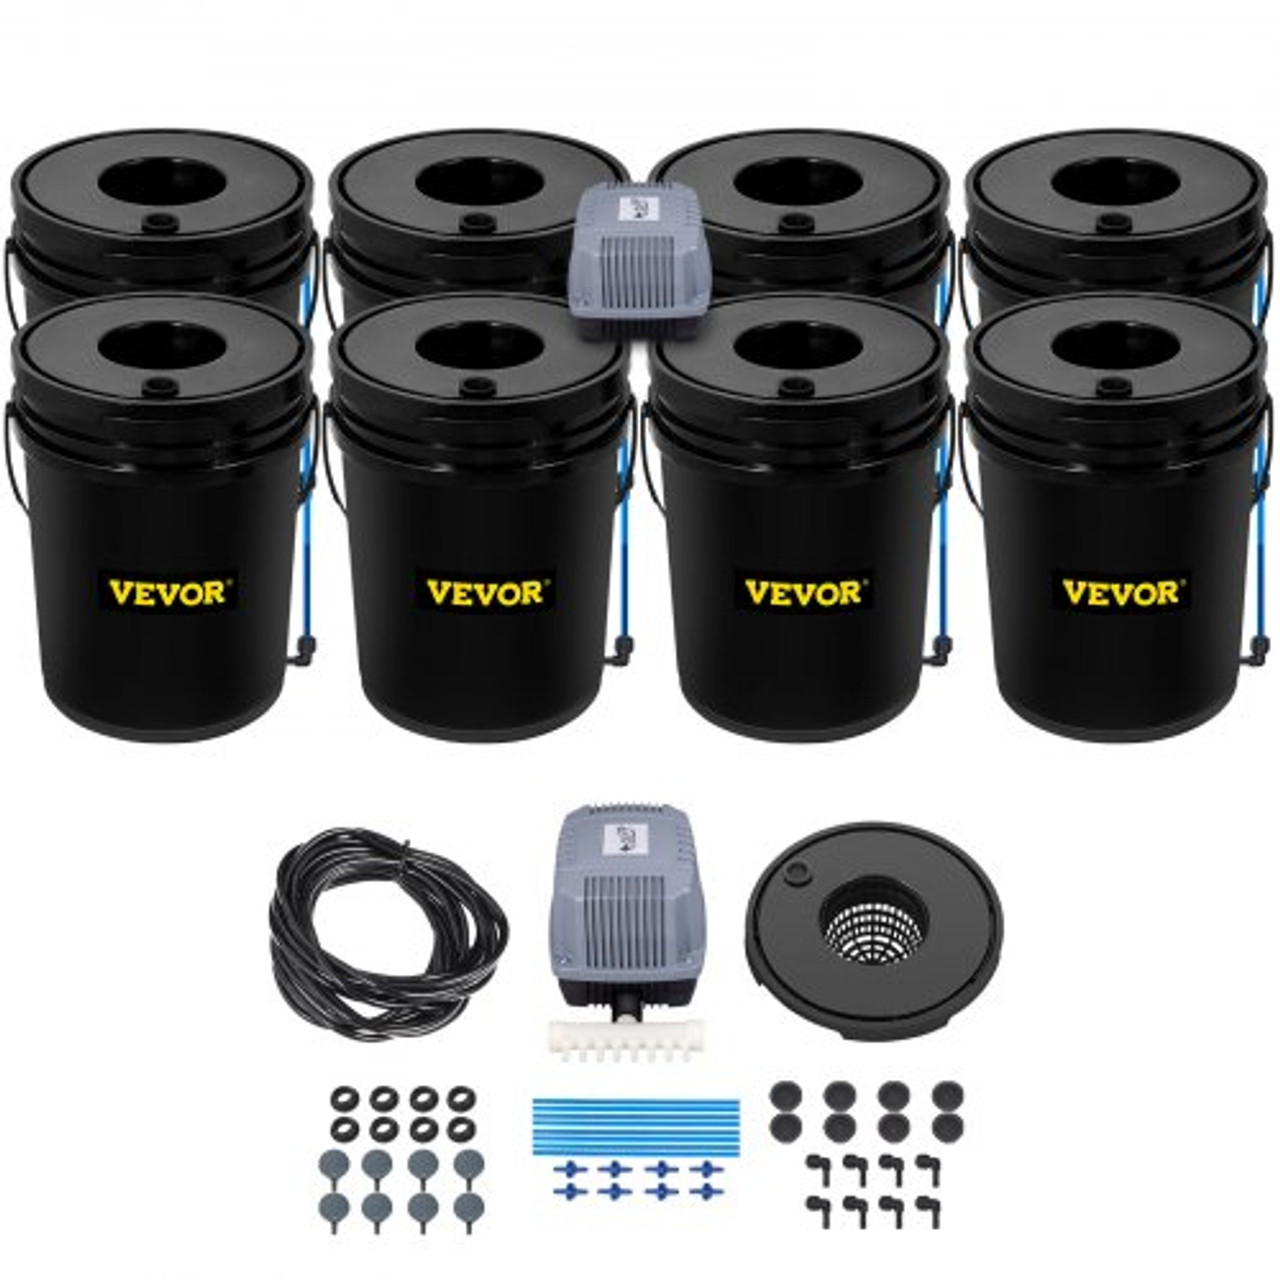 DWC Hydroponic System, 5 Gallon 8 Buckets, Deep Water Culture Growing Bucket, Hydroponics Grow Kit with Pump, Air Stone and Water Level Device, for Indoor/Outdoor Leafy Vegetables